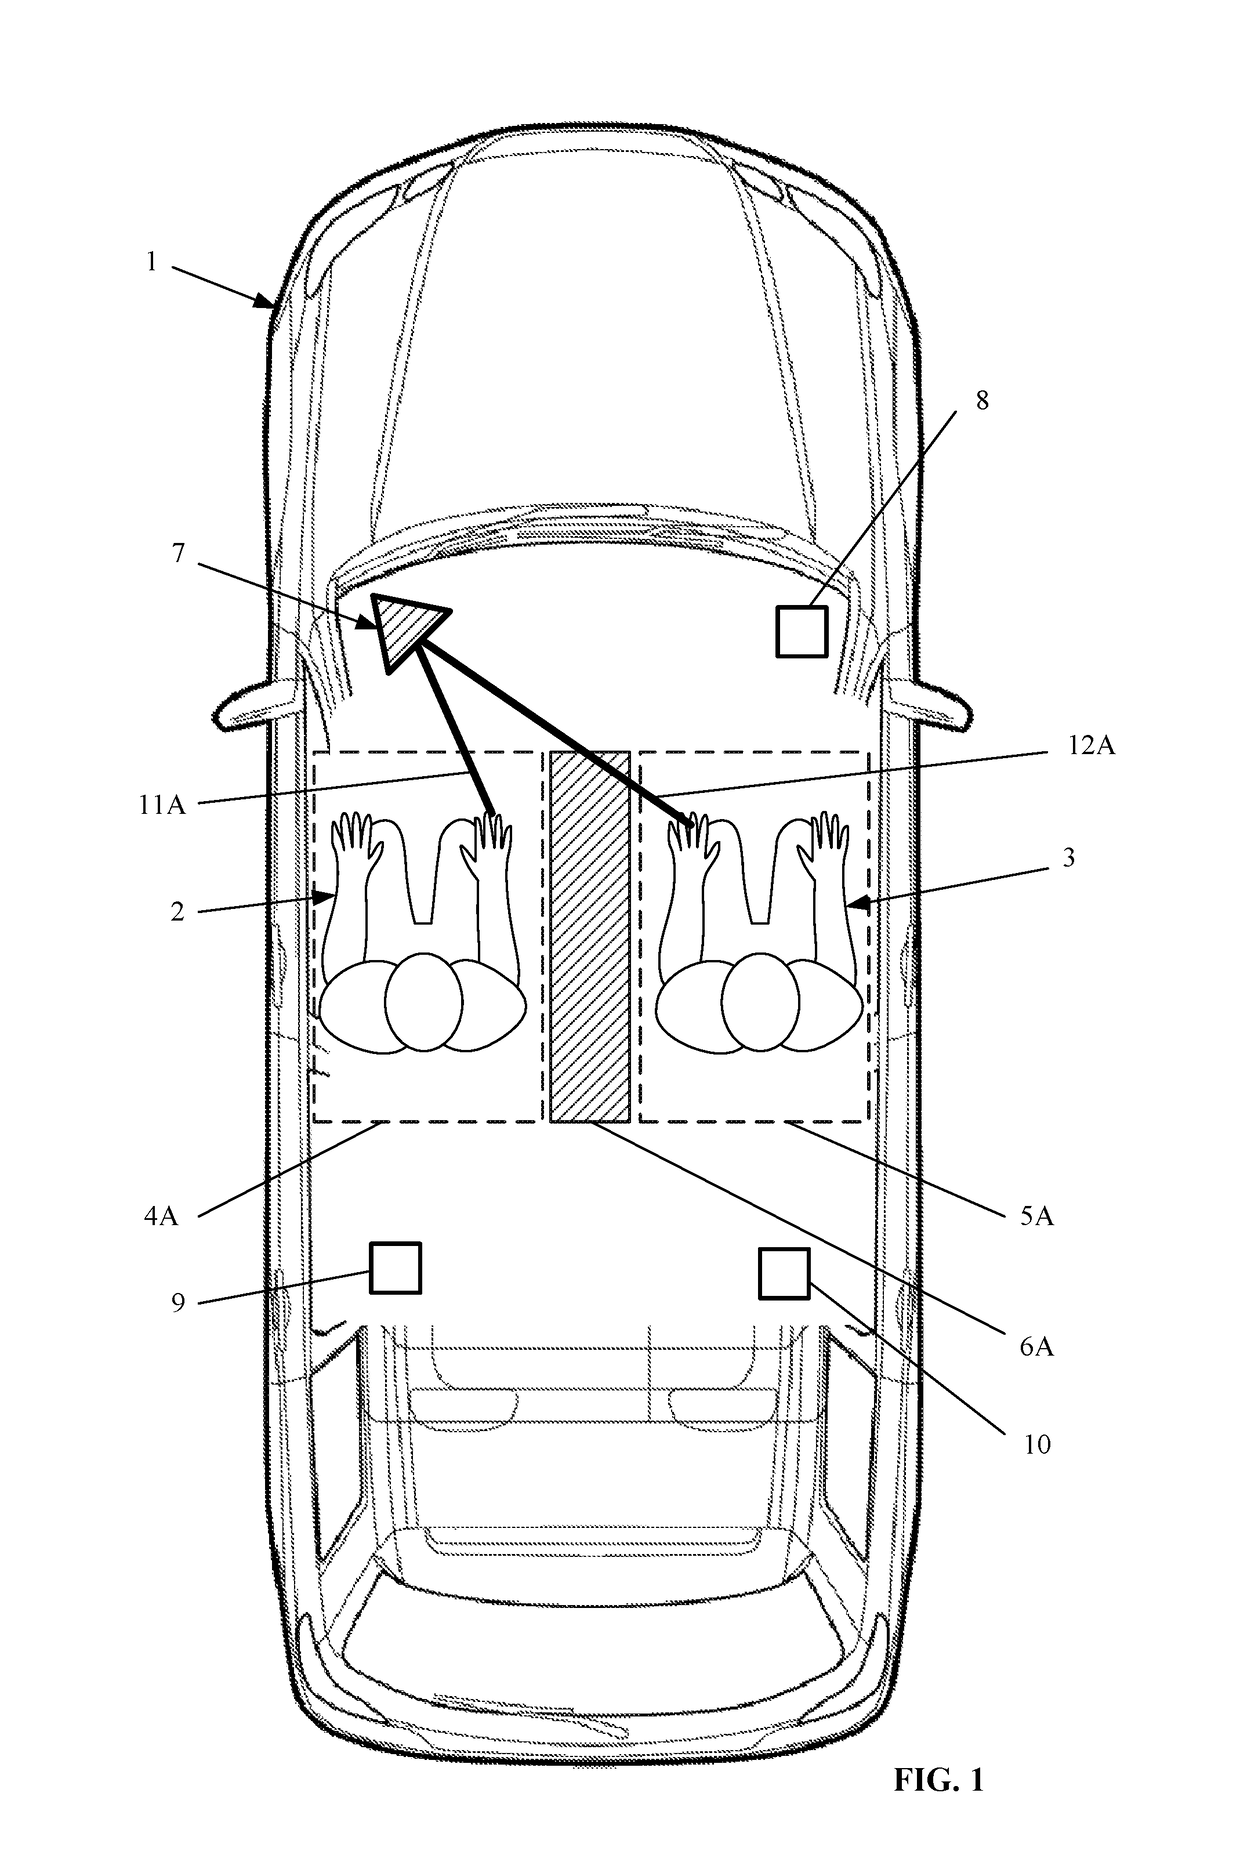 Methods and systems for identifying the user of a smartphone inside a moving vehicle and automatic detection and calculation of the time and location when and where a vehicle has been parked